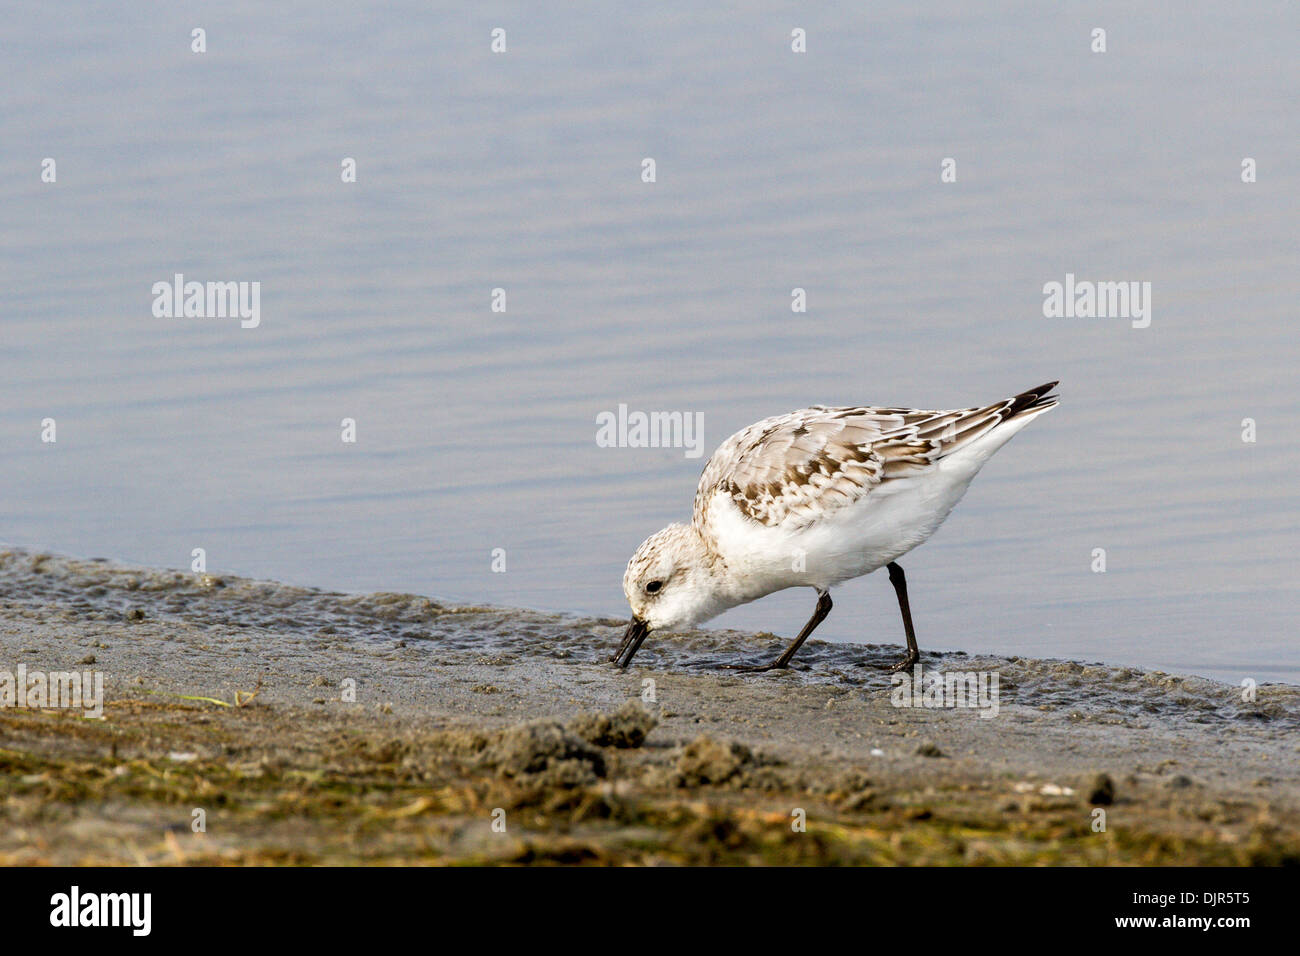 Sanderling sandpiper at Chincoteague National Wildlife Refuge on Assateague Island in Virginia. Stock Photo